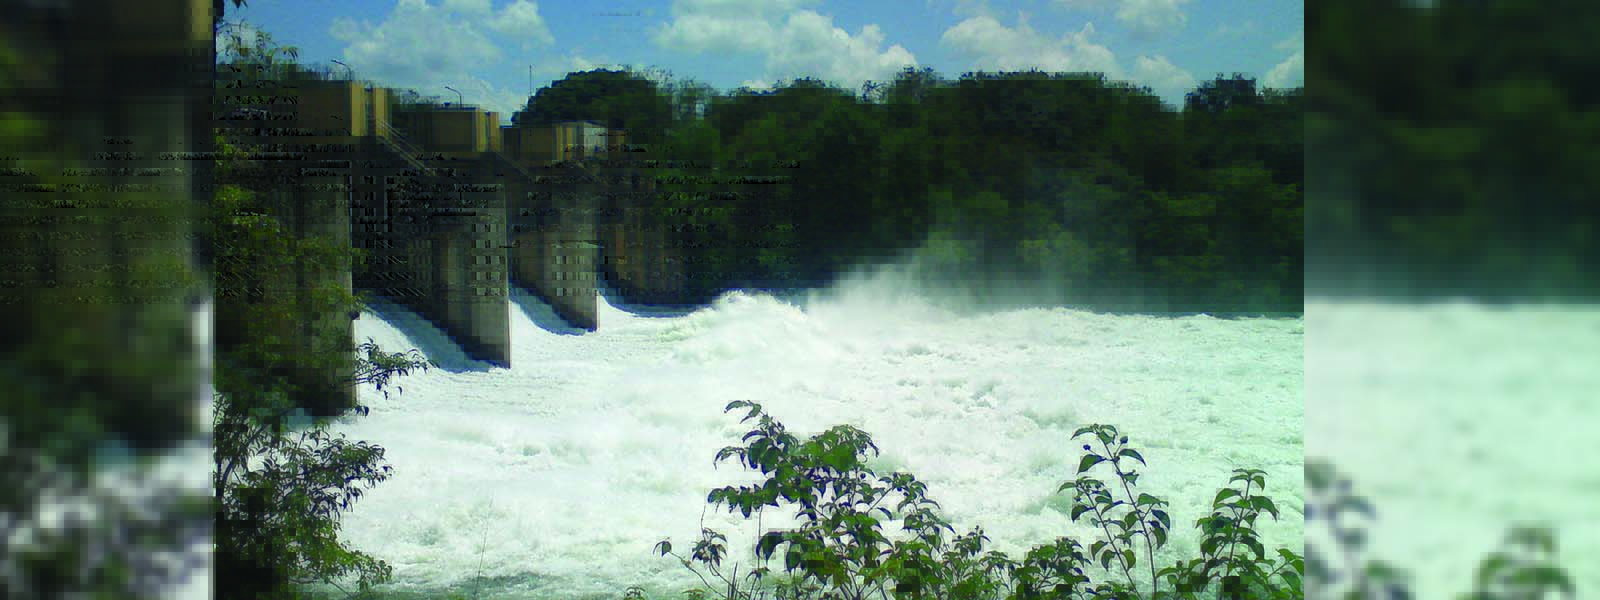 Reservoirs in catchment areas reach spill level